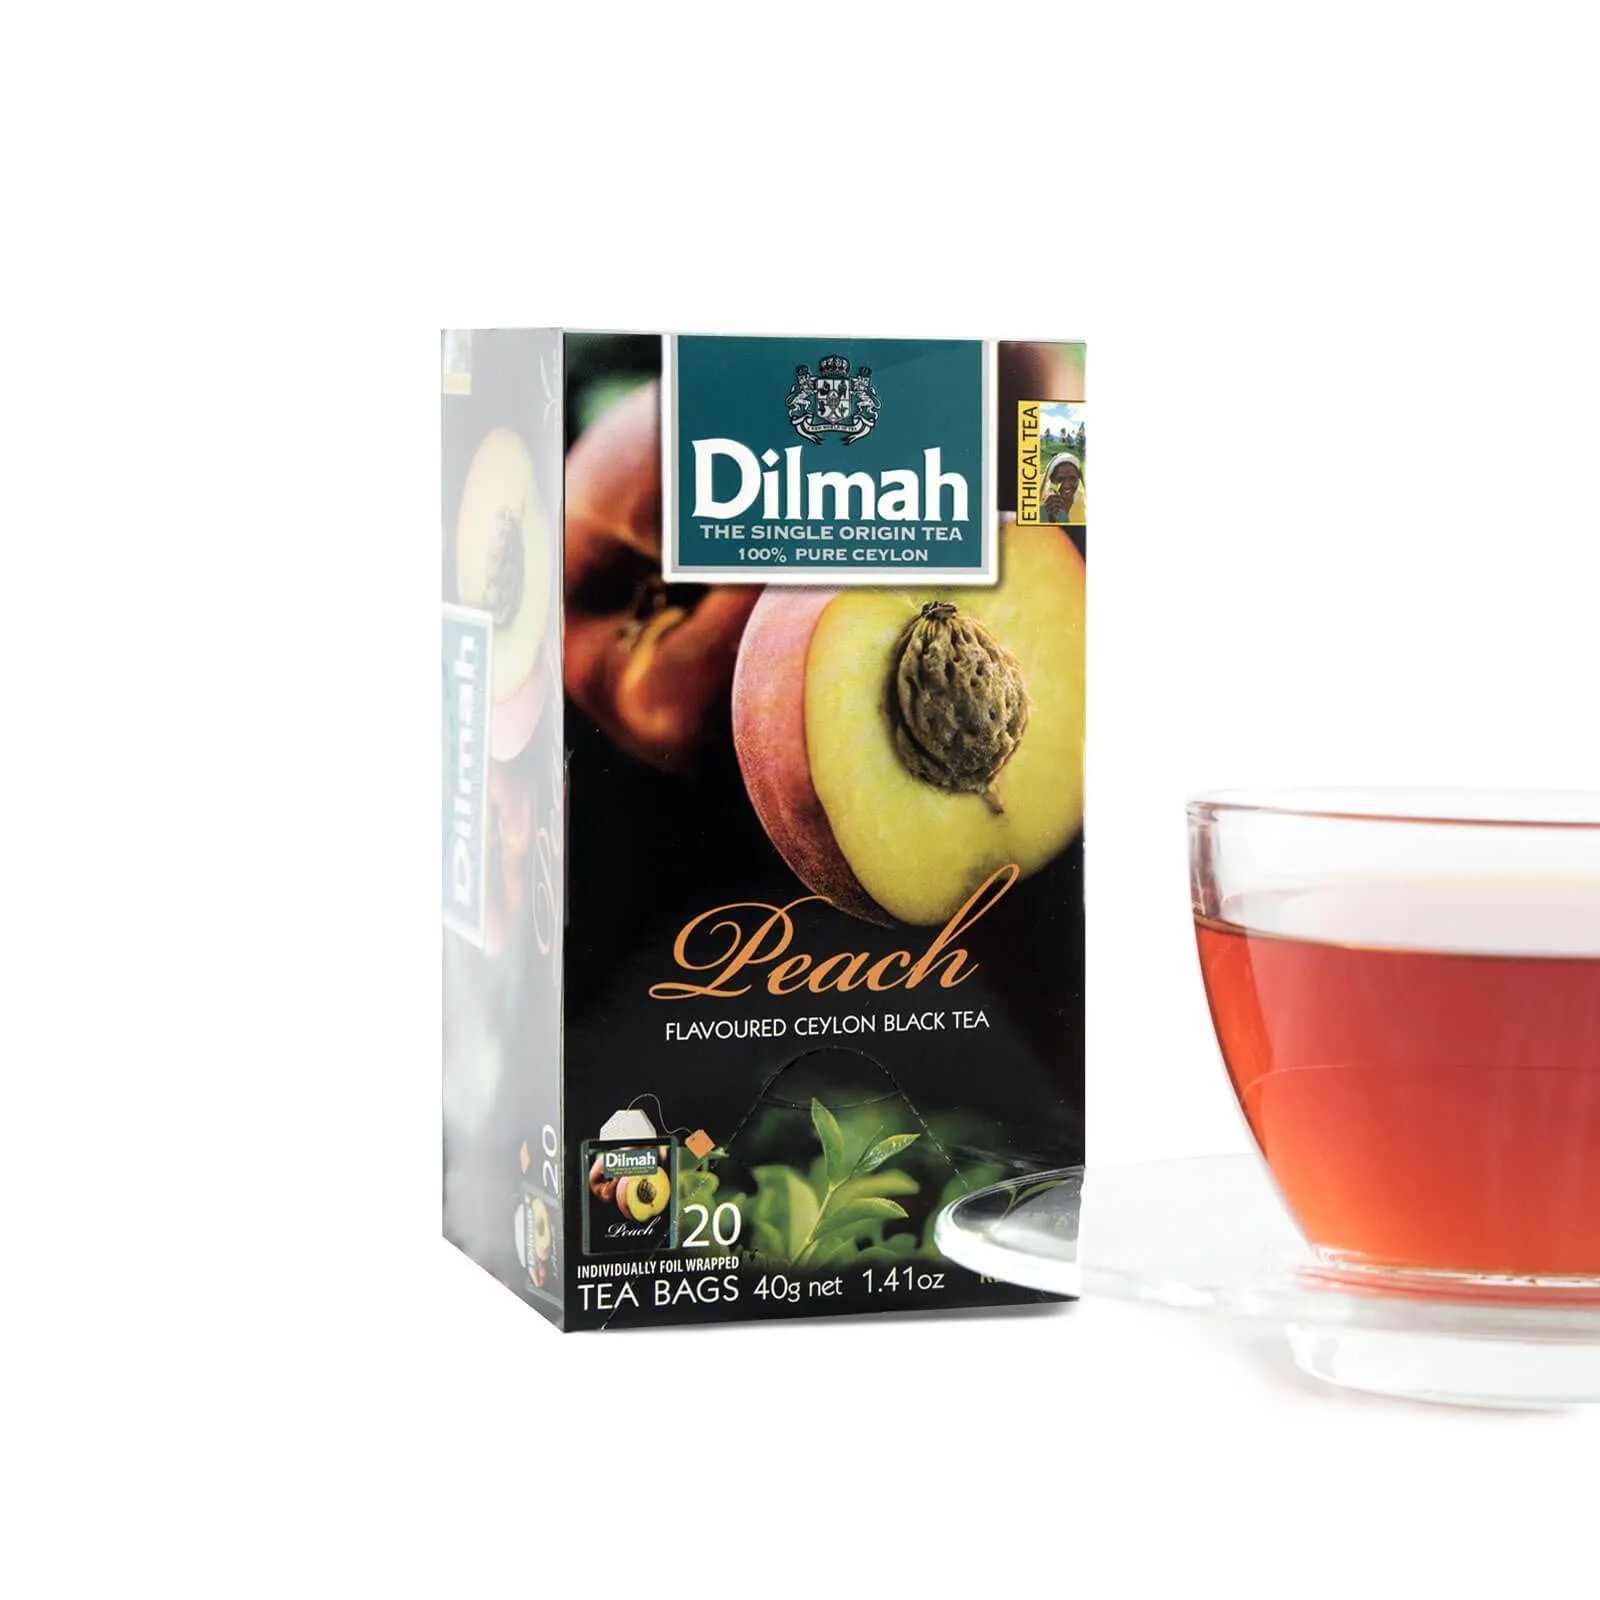 Pack of Peach flavoured Black tea tea bags with cup of tea